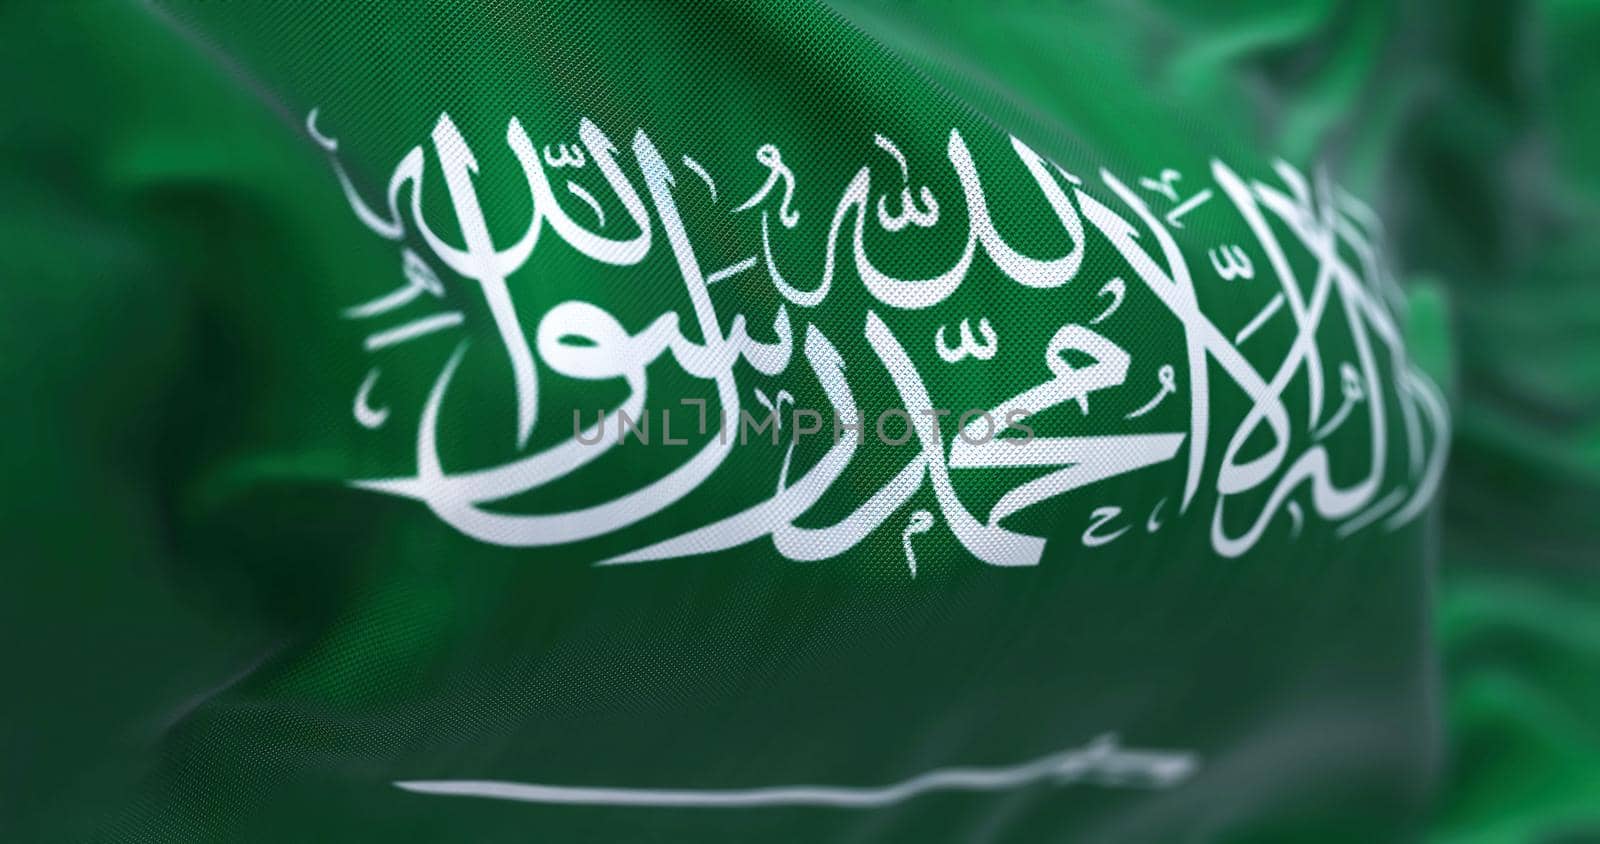 Close-up view of Saudi Arabia national flag waving in the wind. The Kingdom of Saudi Arabia (KSA) is a country on the Arabian Peninsula in Western Asia. Fabric textured background. Selective focus